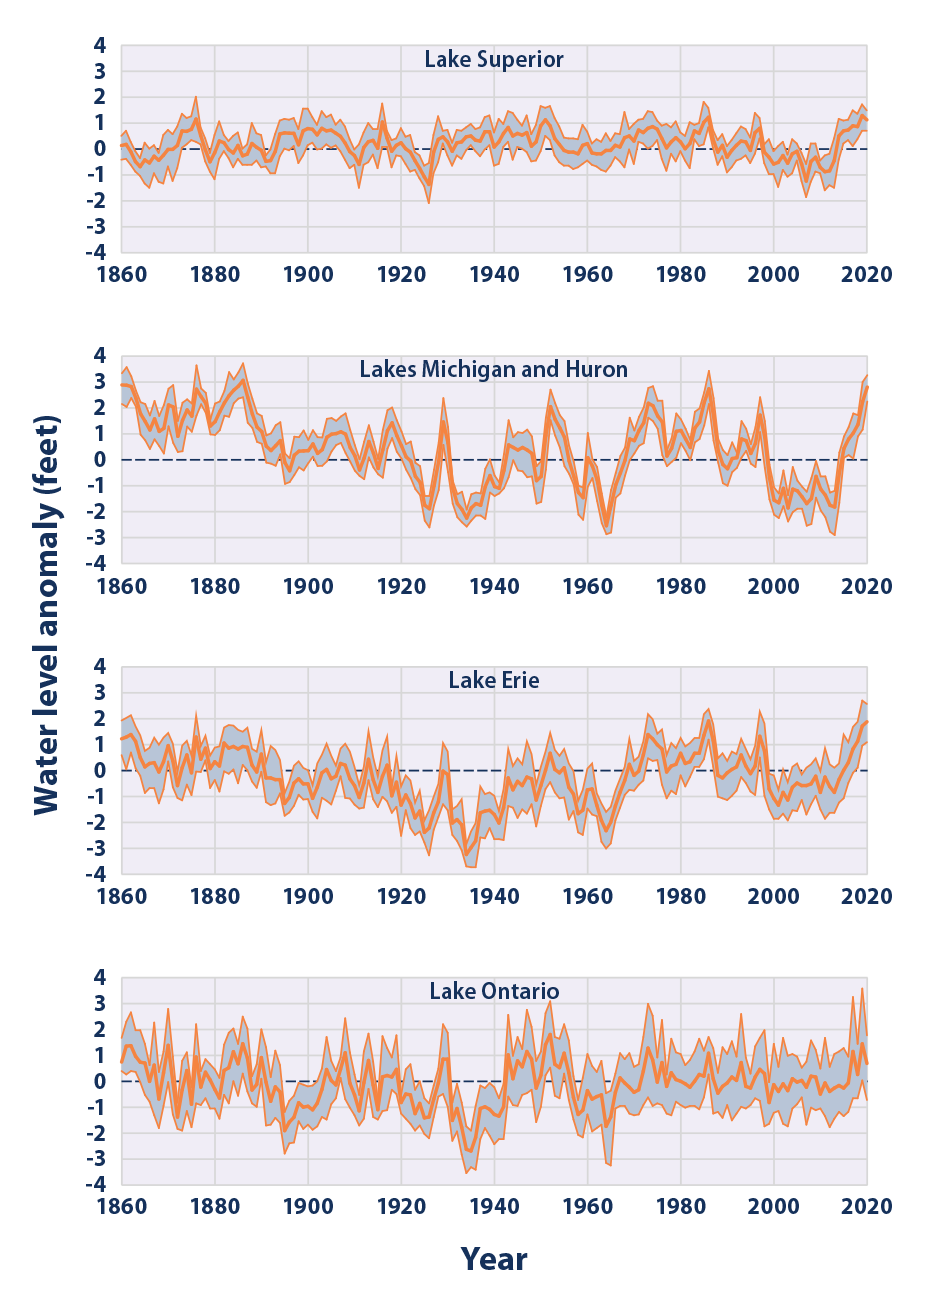 Line graphs showing water levels in each of the Great Lakes from 1860 to 2020.